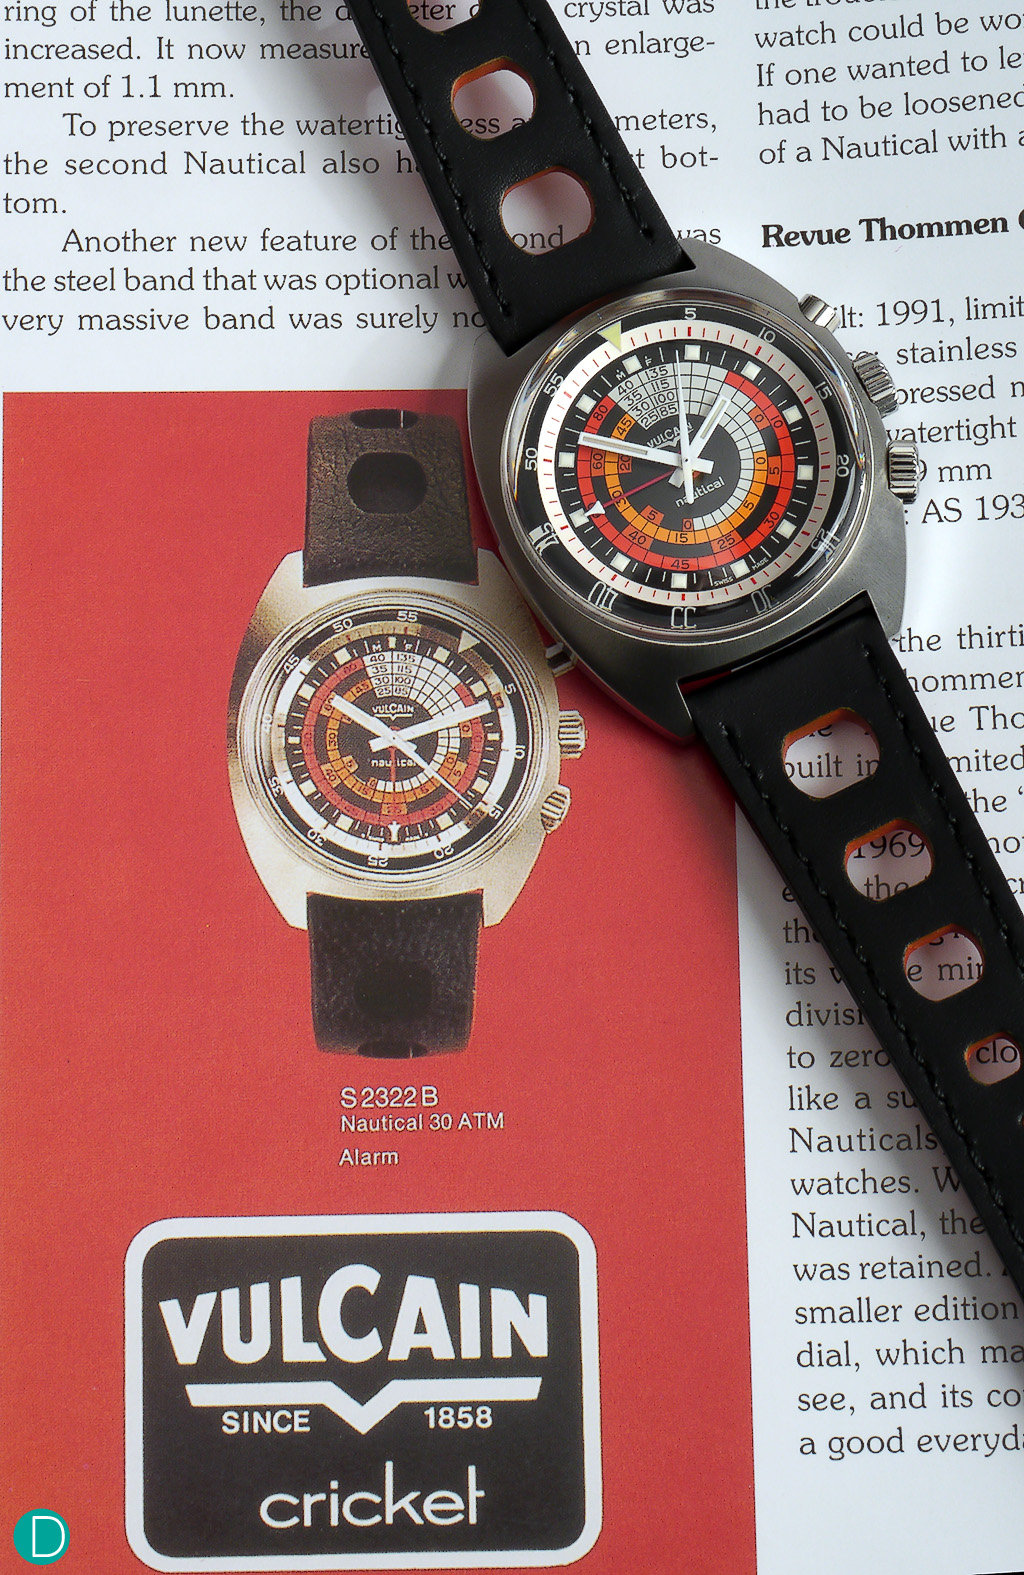 The Vulcain Nautical Seventies on the advertisement for the original one, made in 1970.